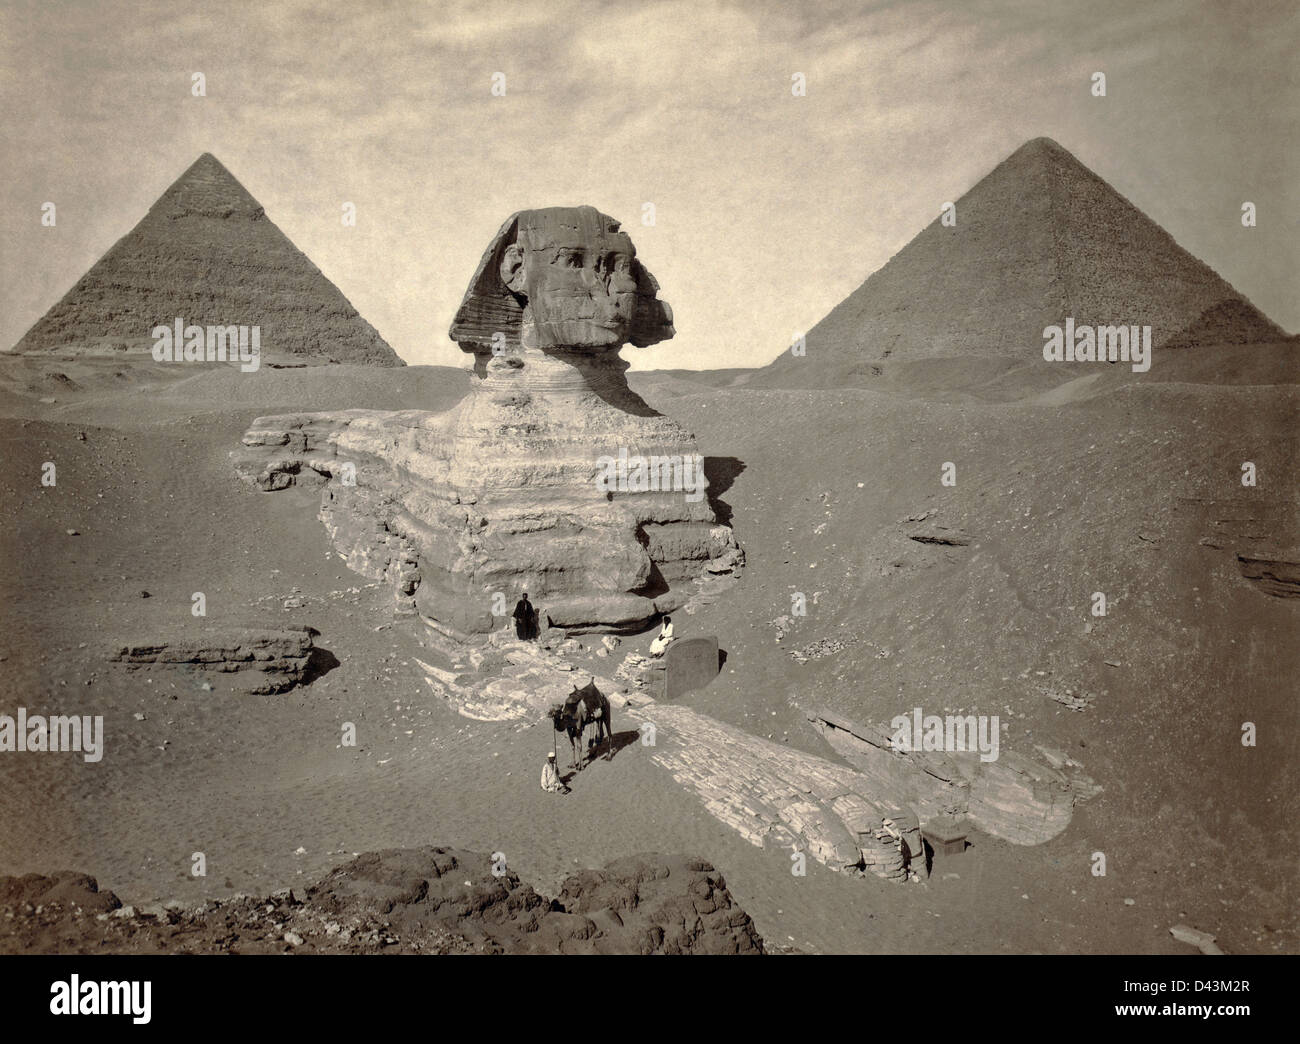 The Sphinx of Giza partially excavated with two pyramids in background in Egypt. Albumen print. Stock Photo